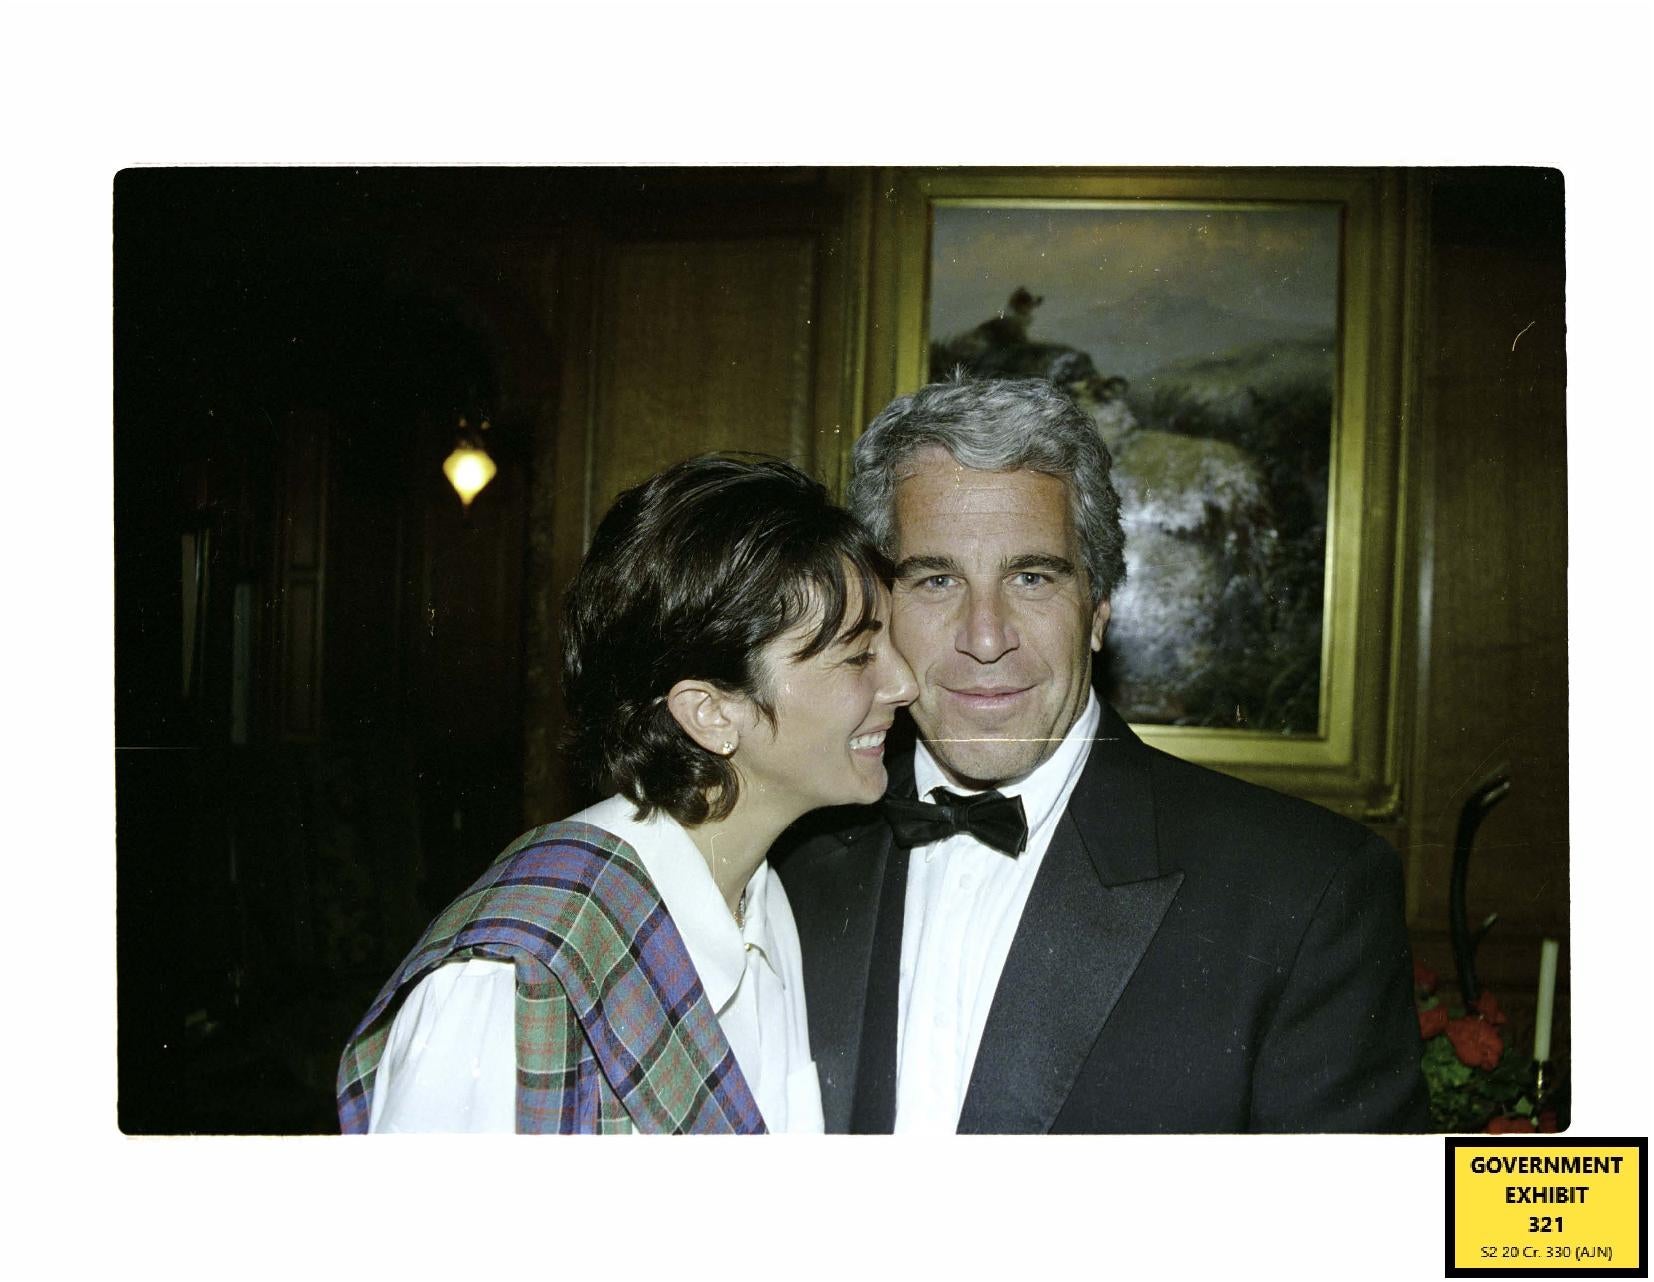 Undated handout file photo issued by US Department of Justice of Ghislaine Maxwell with Jeffrey Epstein, which has been shown to the court during the sex trafficking trial of Maxwell in the Southern District of New York. British socialite Ghislaine Maxwell has been convicted of helping American financier Jeffrey Epstein sexually abuse teenage girls (PA)